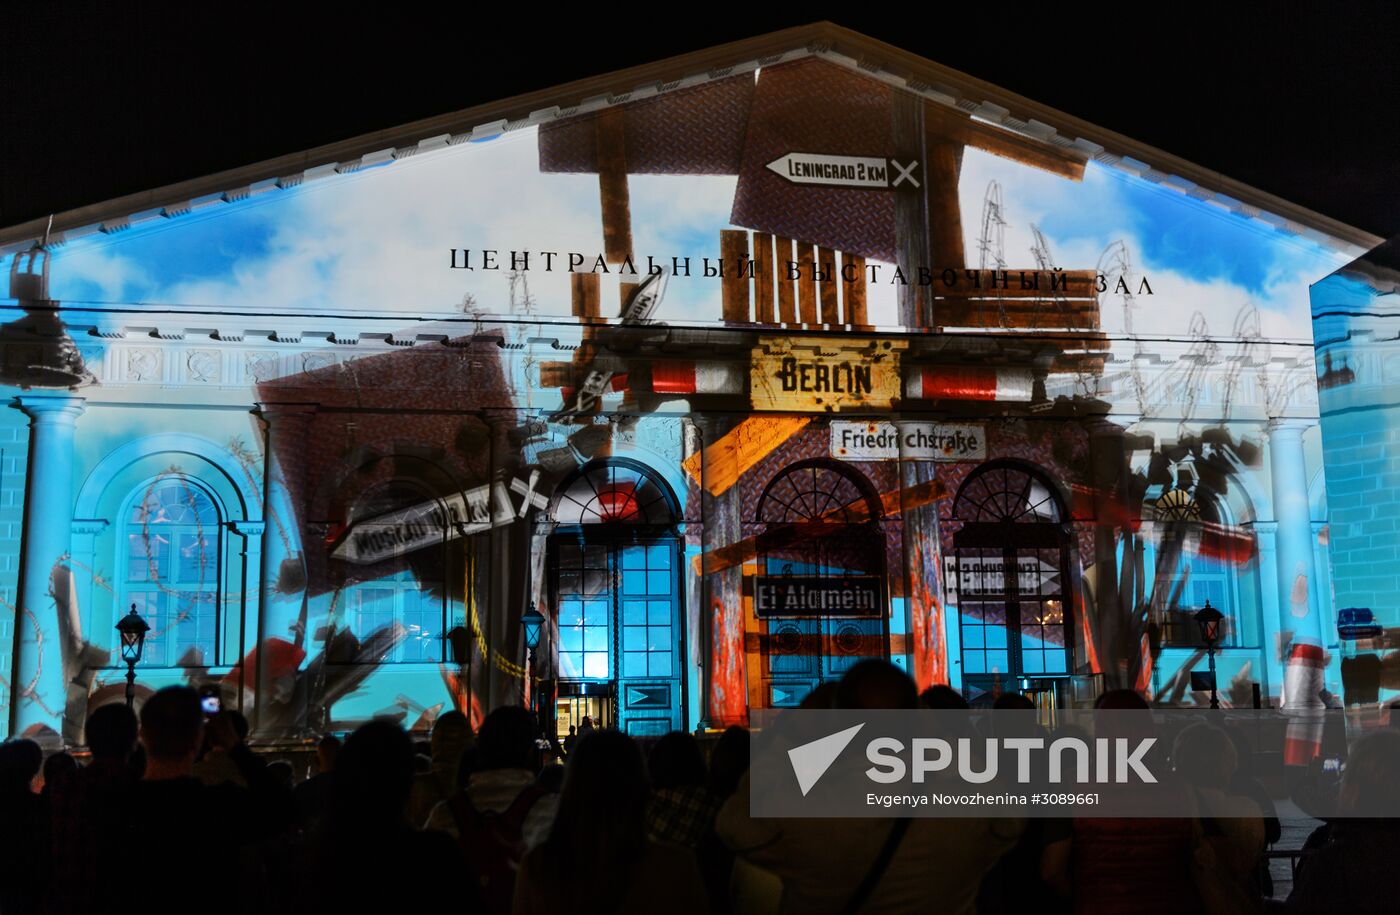 "Letters of Victory" multimedia show on Manezhnaya Square